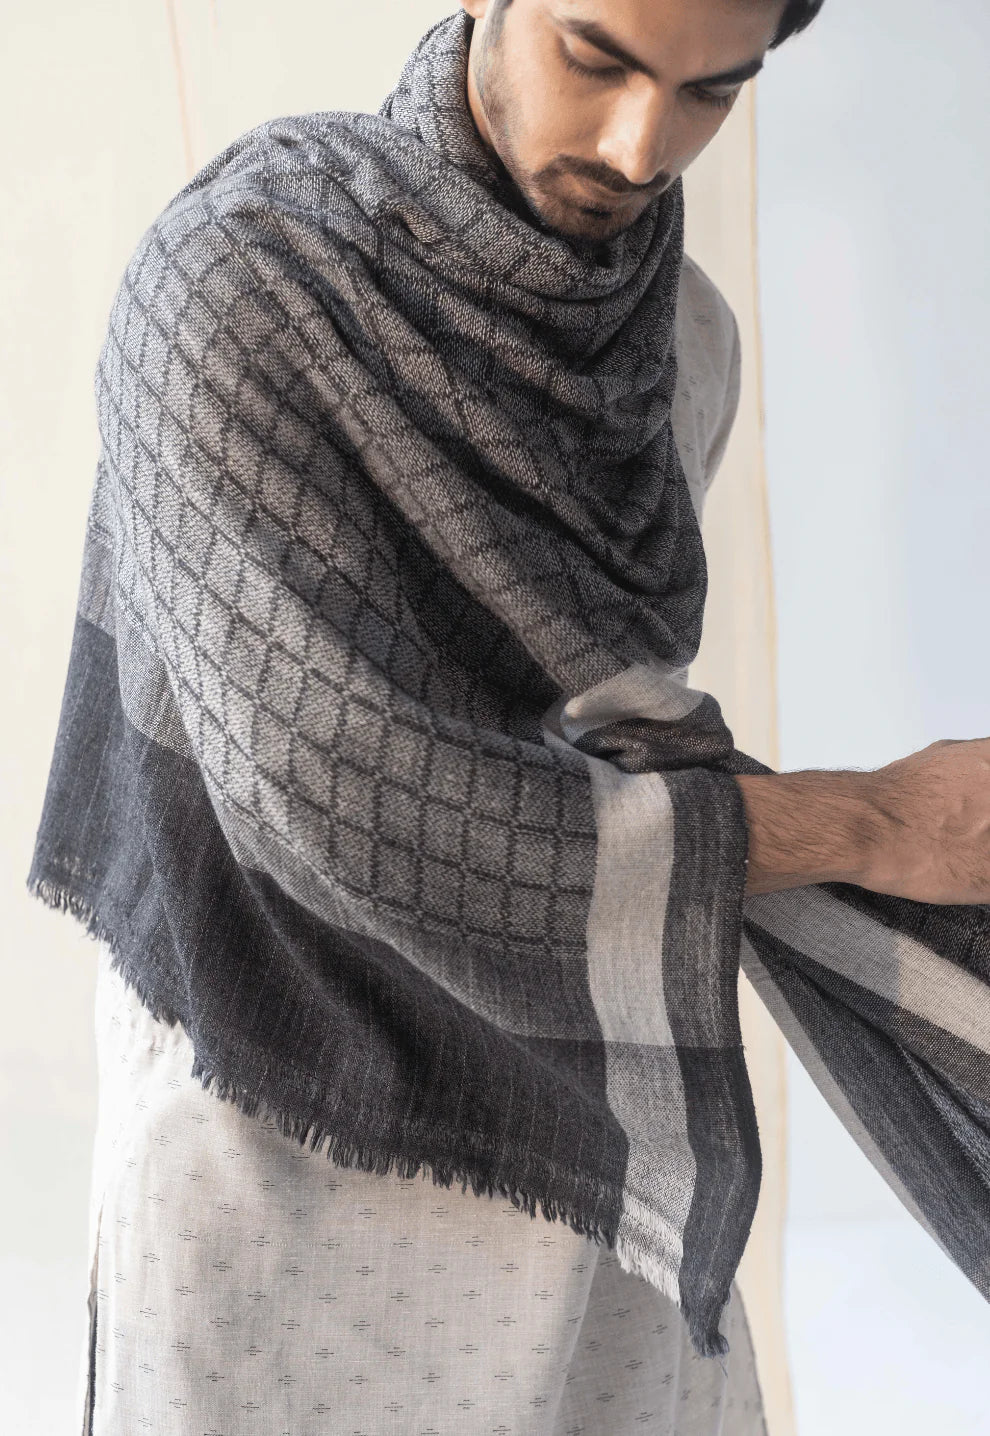 Soft Cashmere Stole: Gray and Black Check Print, 75cm x 210cm | Vadon Soft Cashmere Stole - Gray & Black